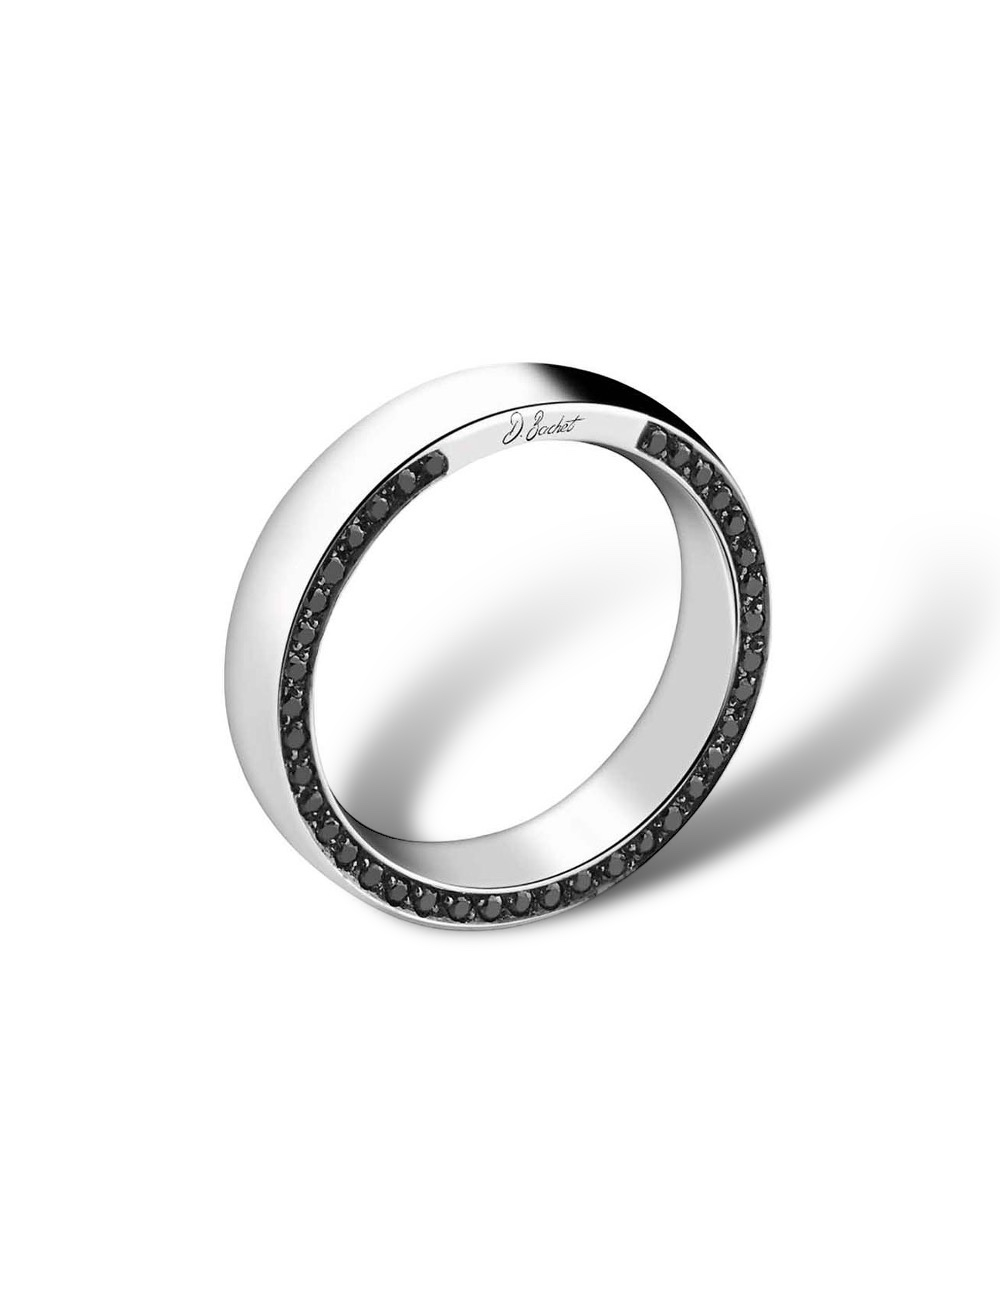 Jewelry creation 'Subtile', platinum ring with the option of diamonds on one or both sides, for men and women.